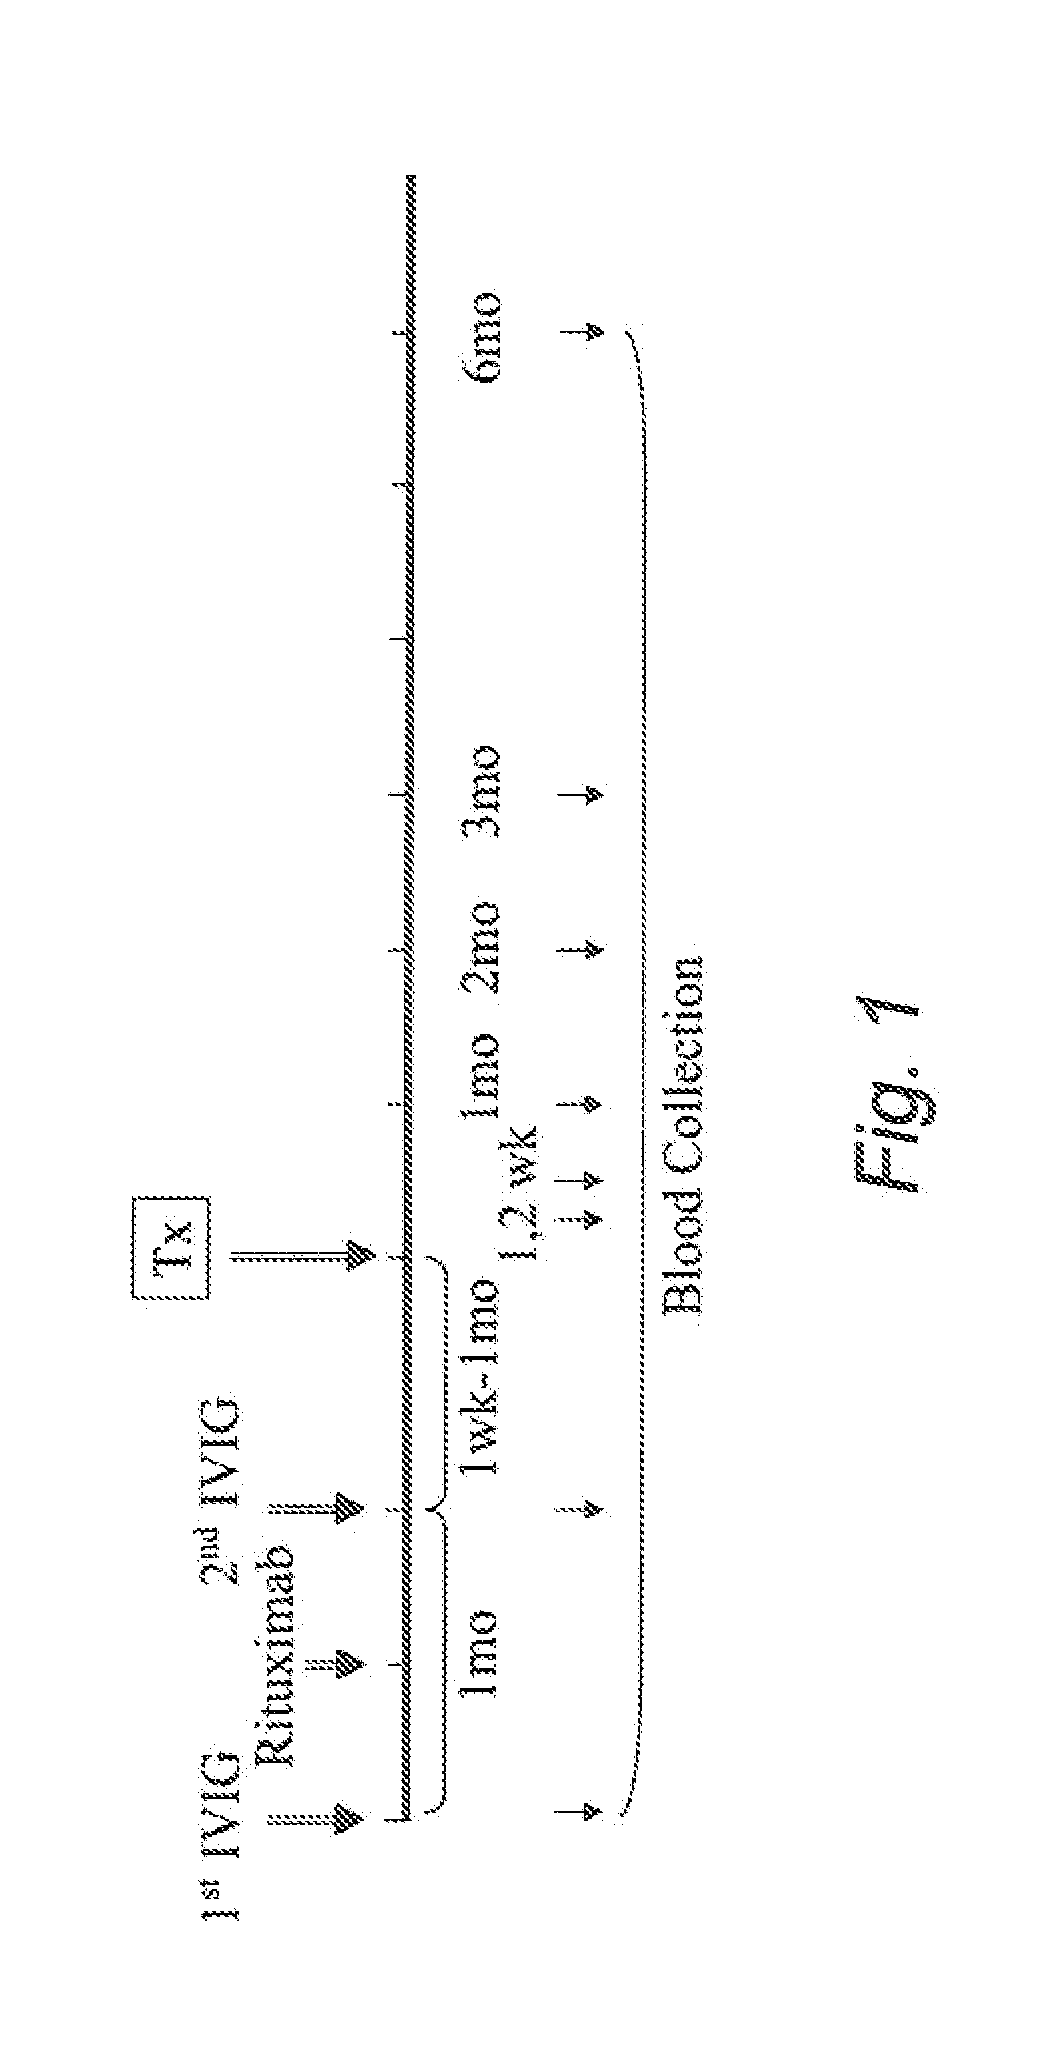 Methods of diagnosing and monitoring rejection mediated by antibodies